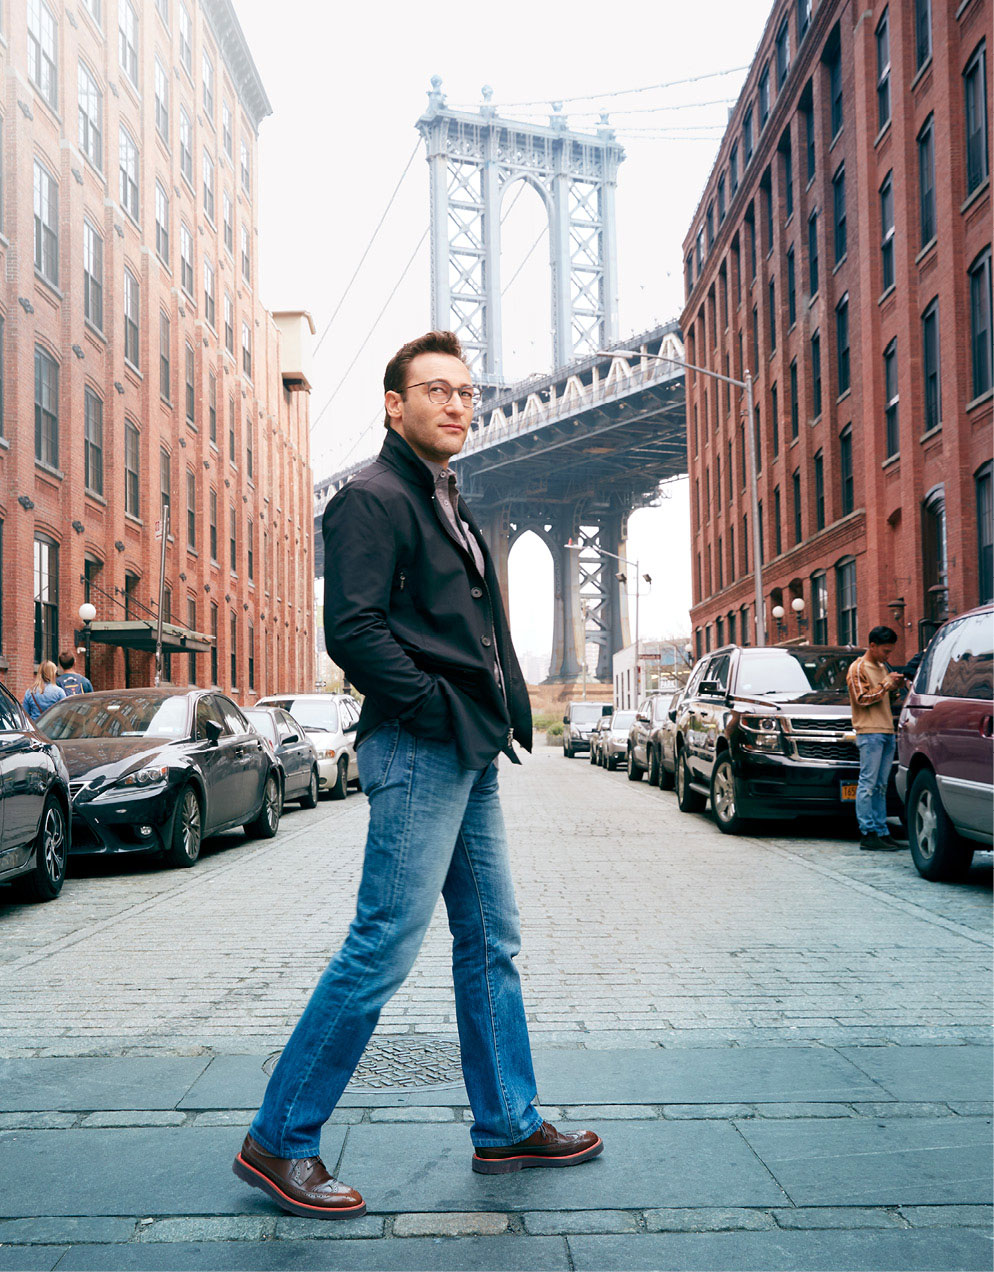 Simon Sinek: The Secret to Leadership and Millennials Is Simply Purpose